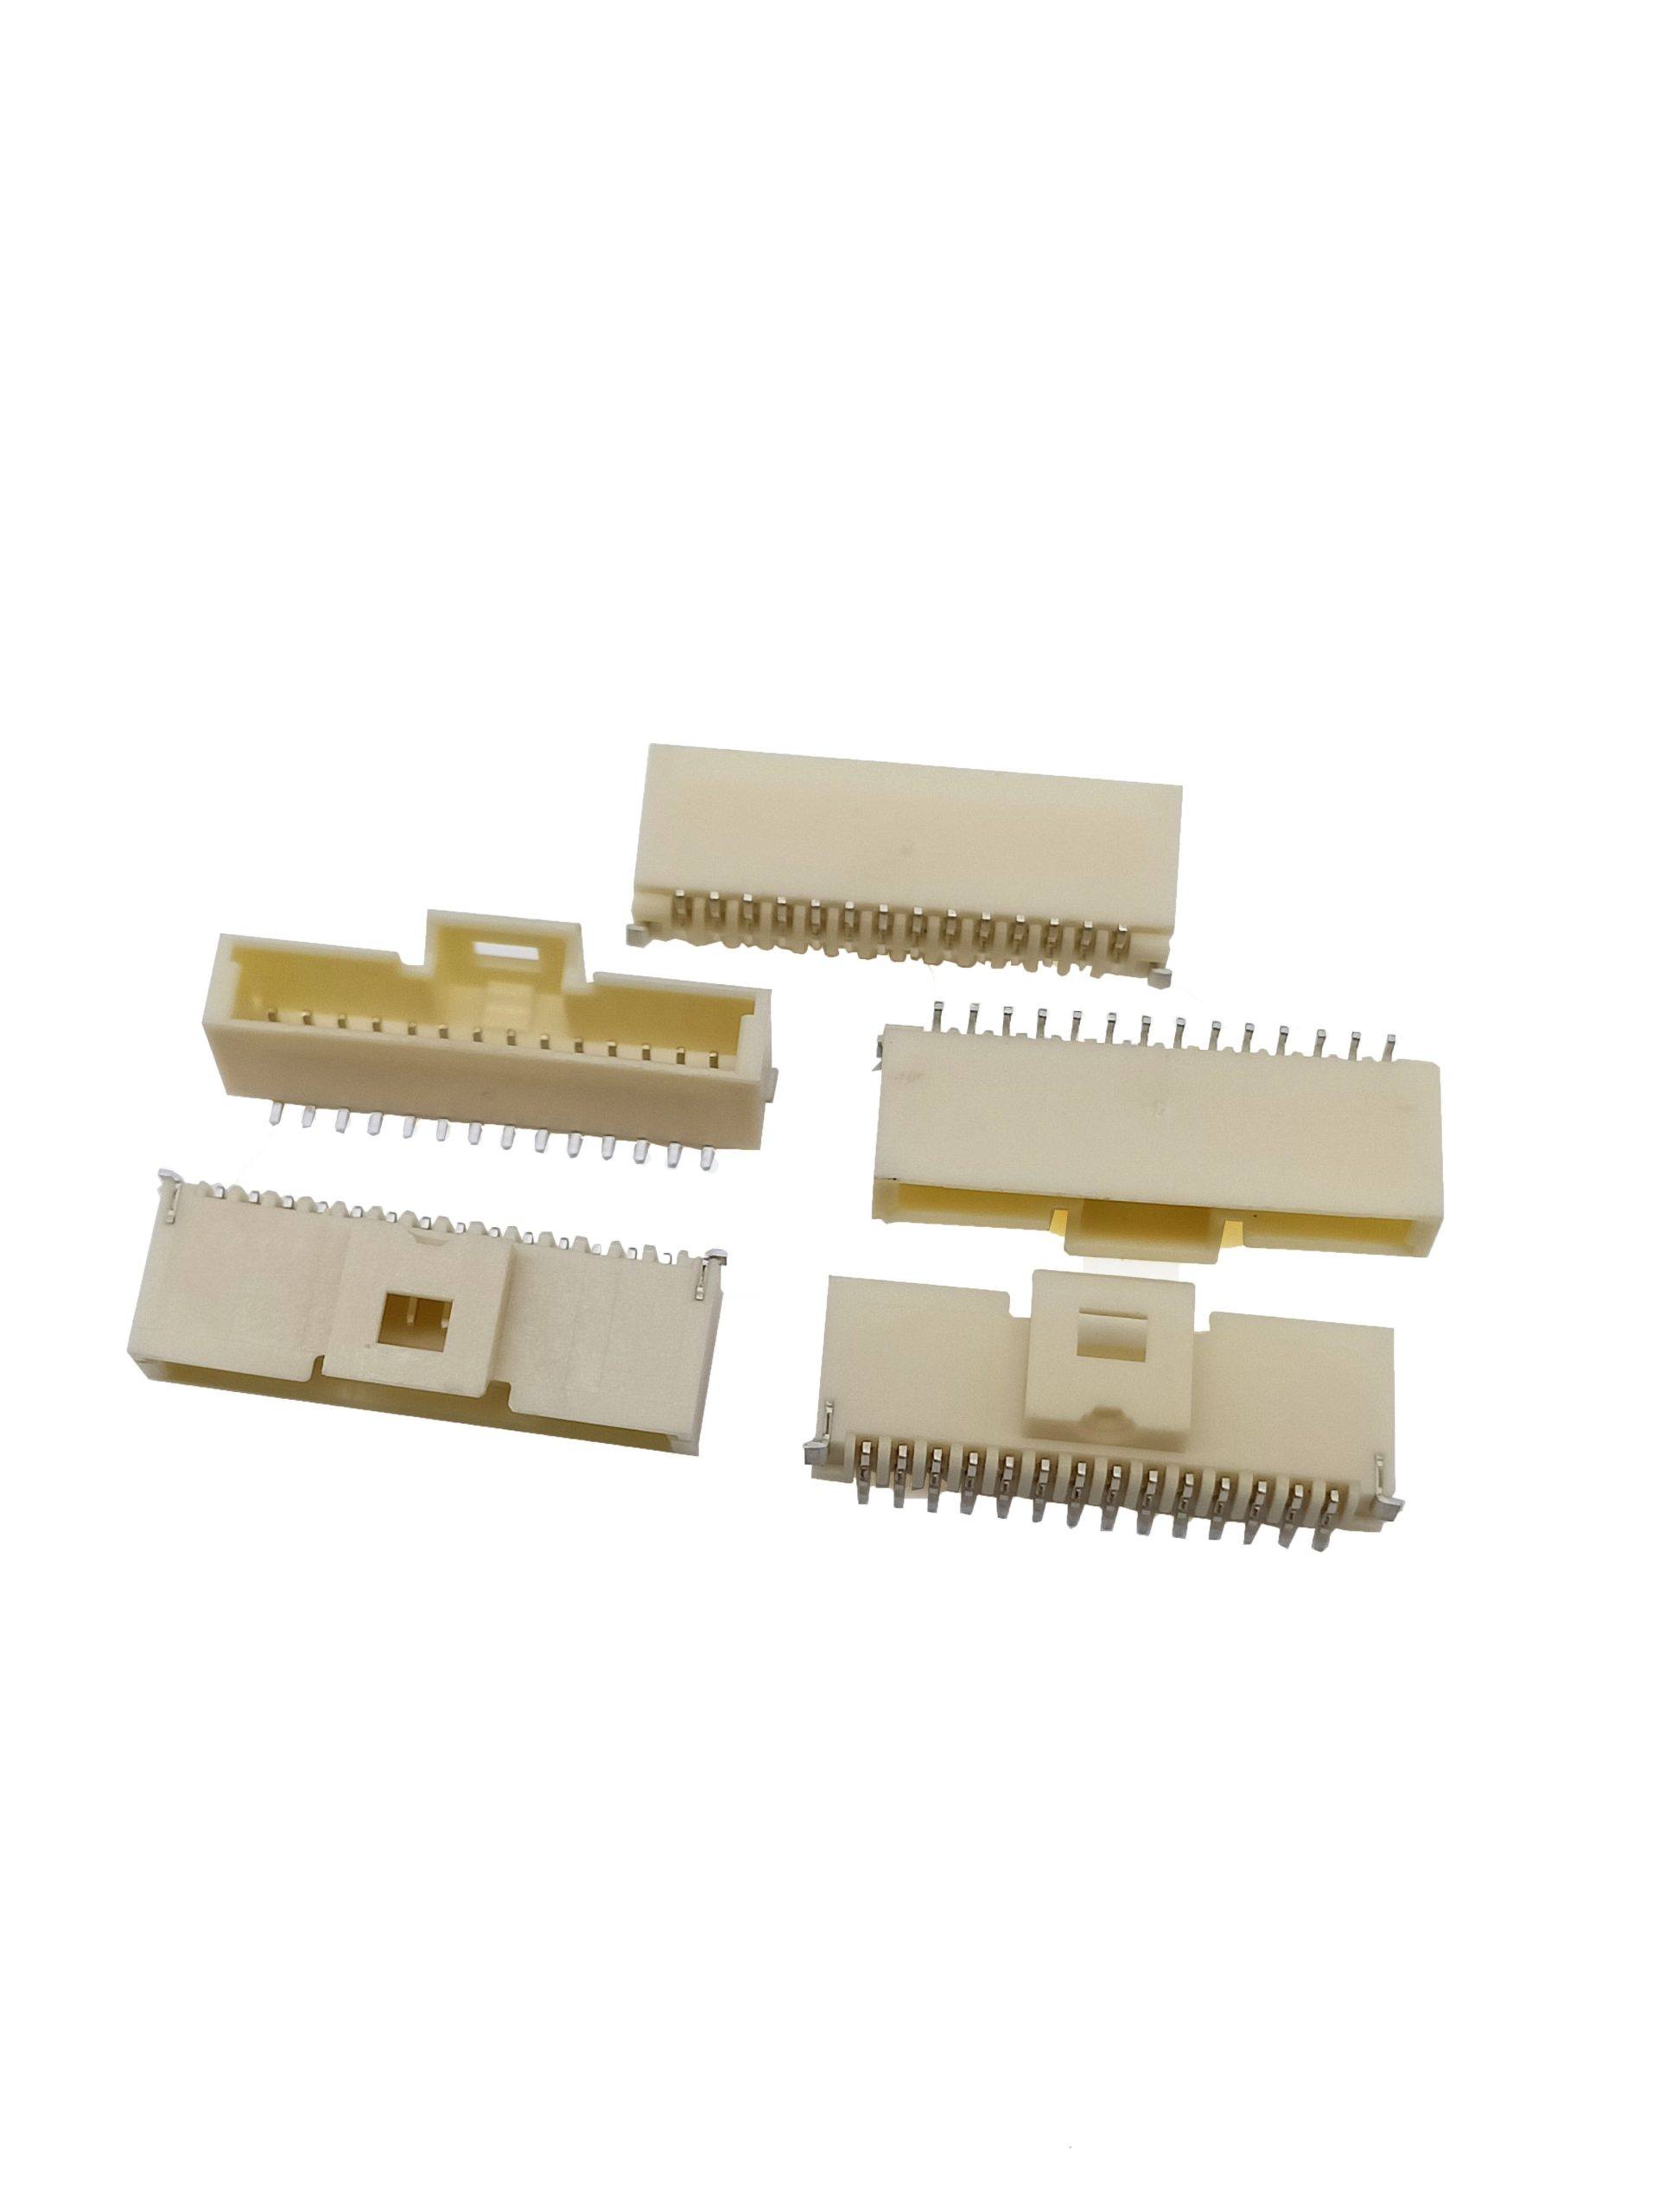 A long wire extension board provides extended reach for connecting devices and components, offering flexibility in electronic setups and configurations.